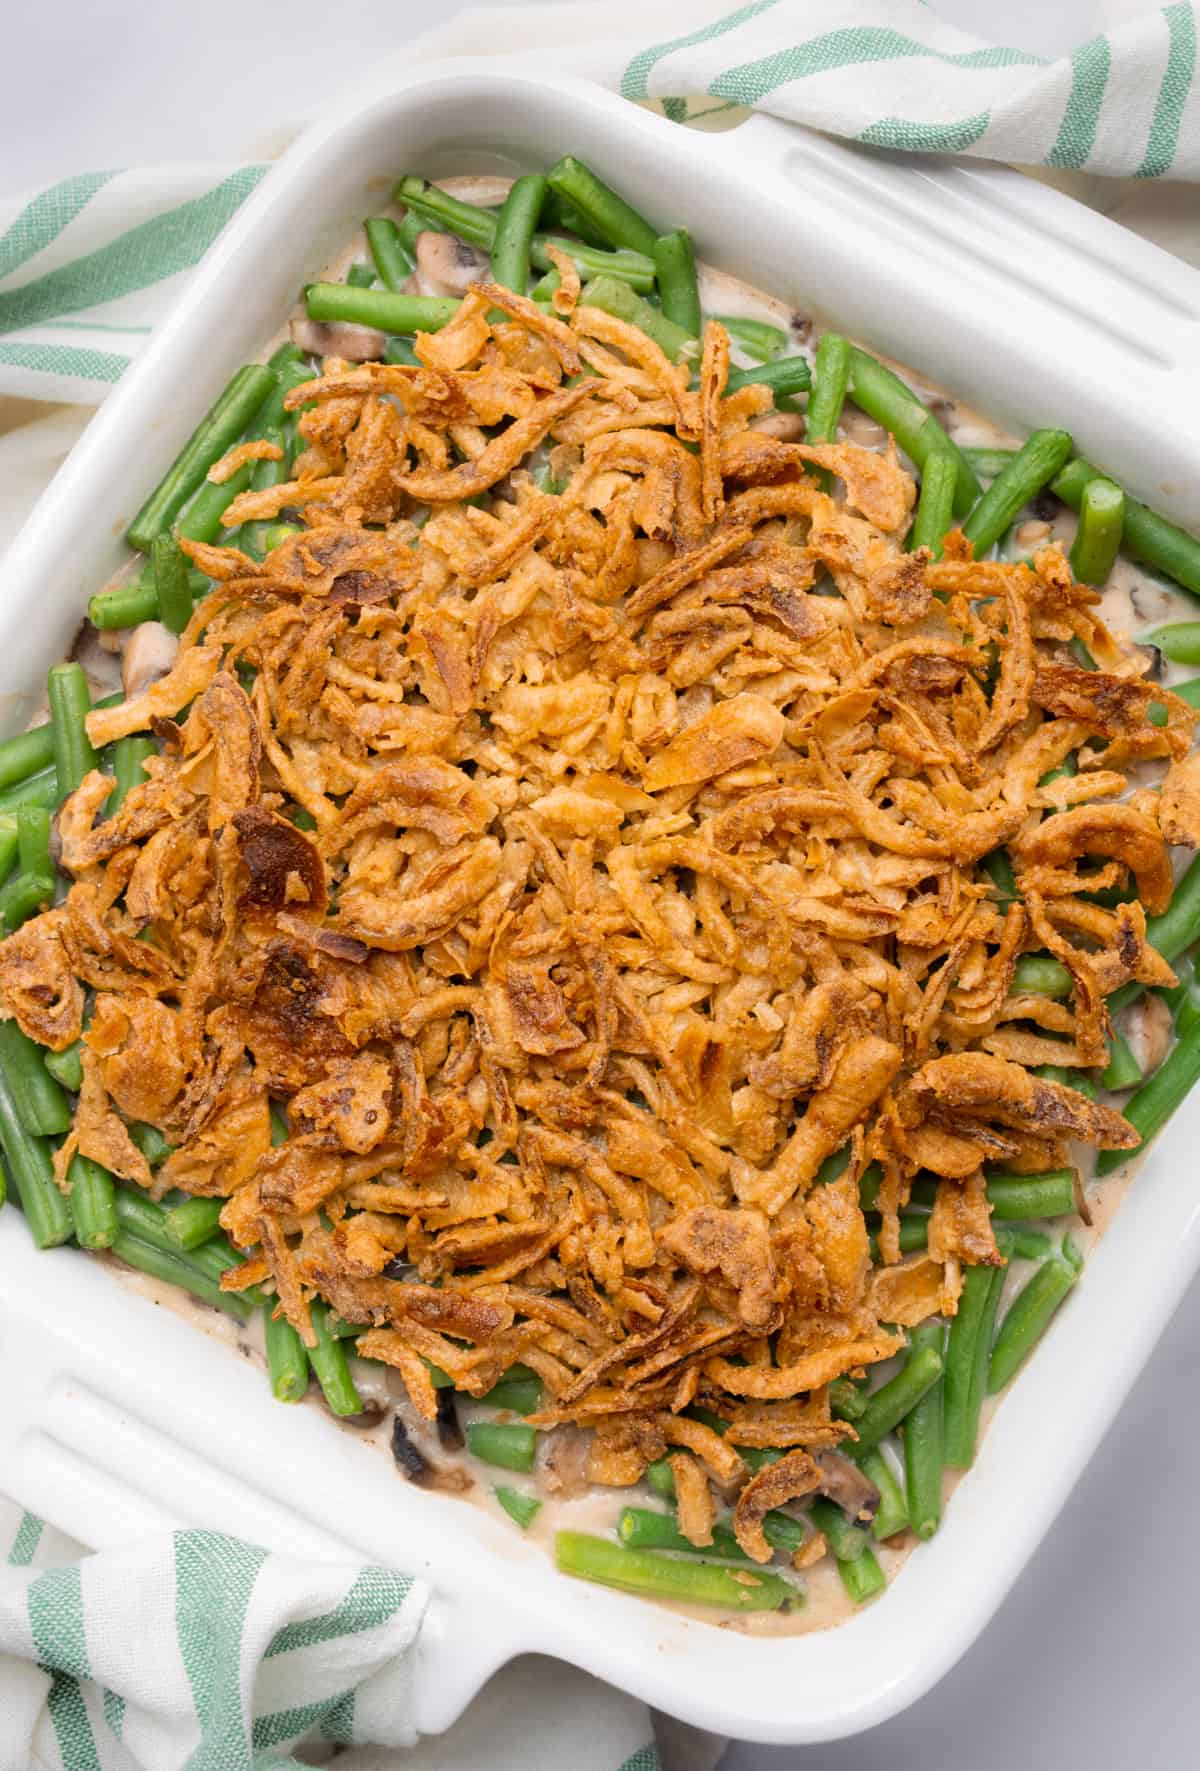 Vegan green bean casserole in a square white dish, after baking in the oven.